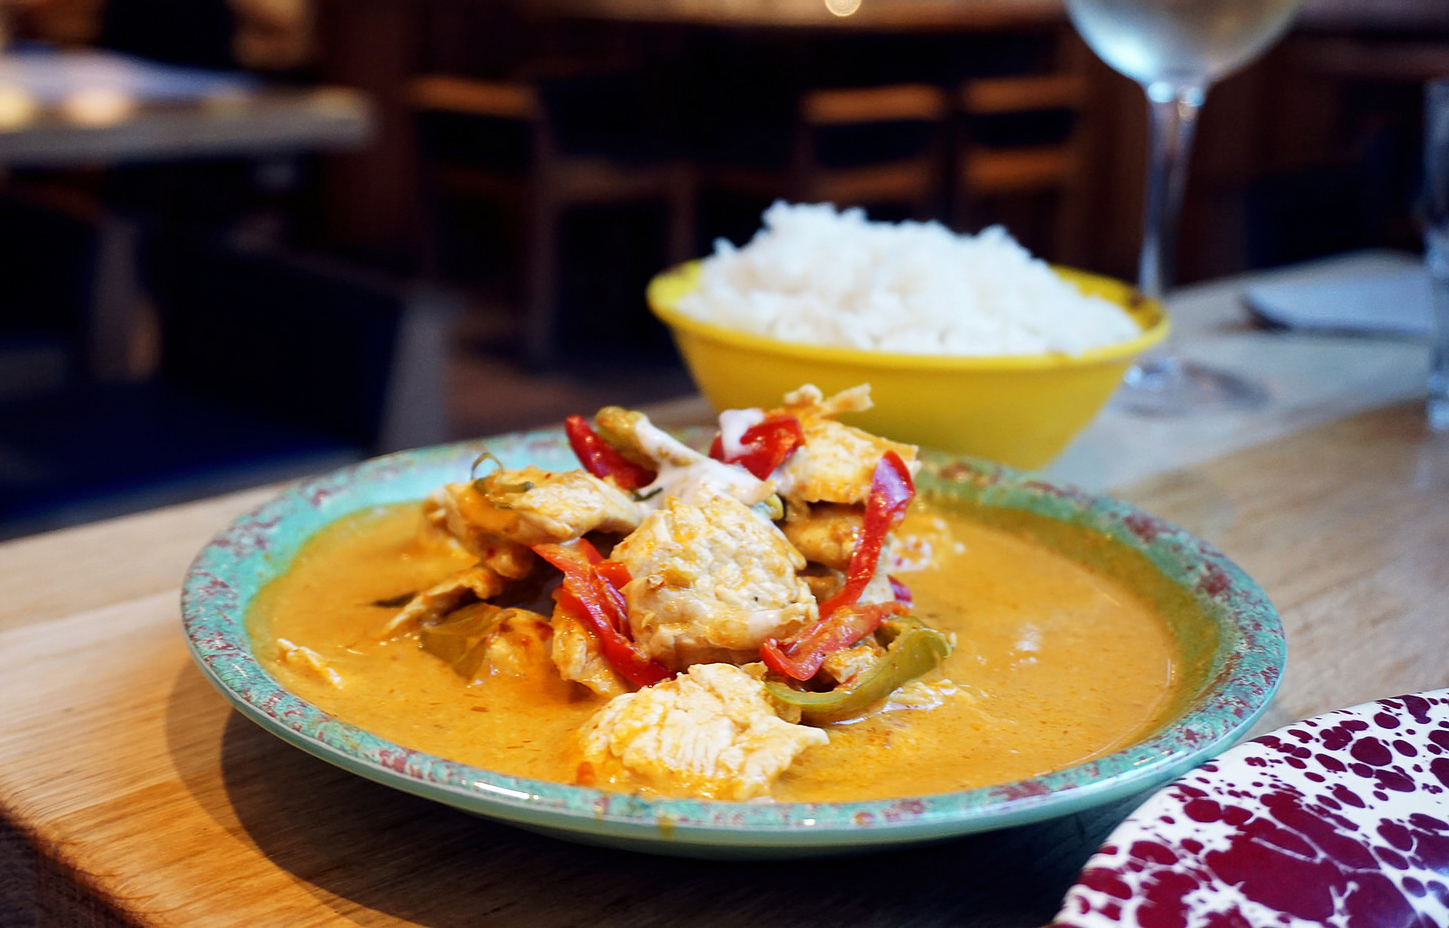 Gluten free Thai red curry and steamed jasmine rice from Rosa's Thai Cafe in Islington | gluten free Rosas's Thai Cafe | gluten free London